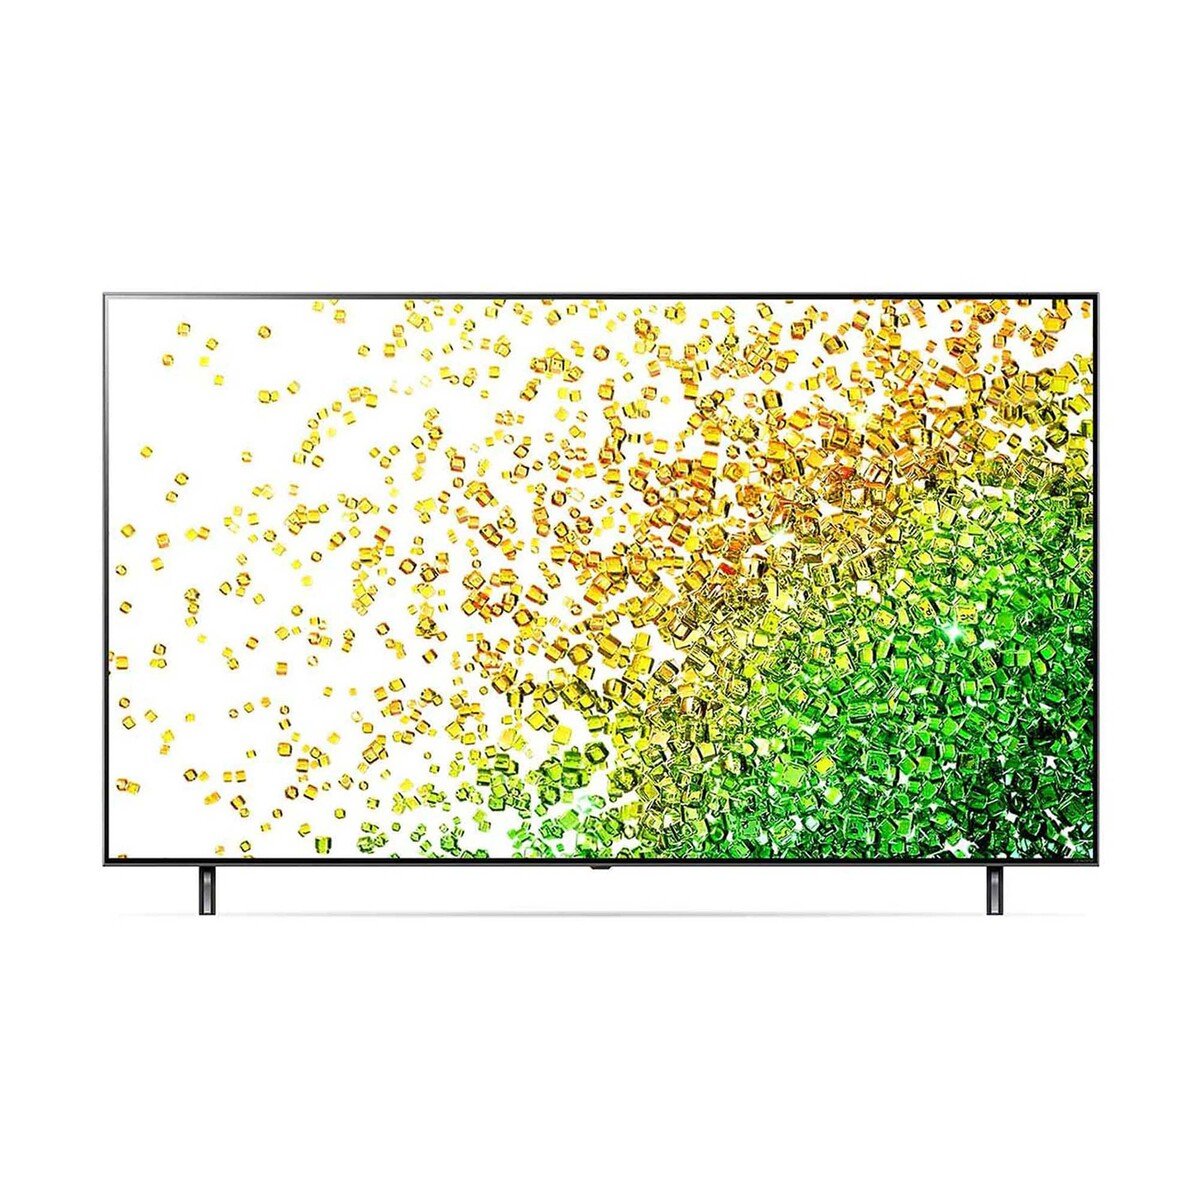 LG NanoCell TV 75 Inch NANO85 Series, New 2021 Cinema Screen Design 4K Cinema HDR webOS Smart with ThinQ AI Local Dimming